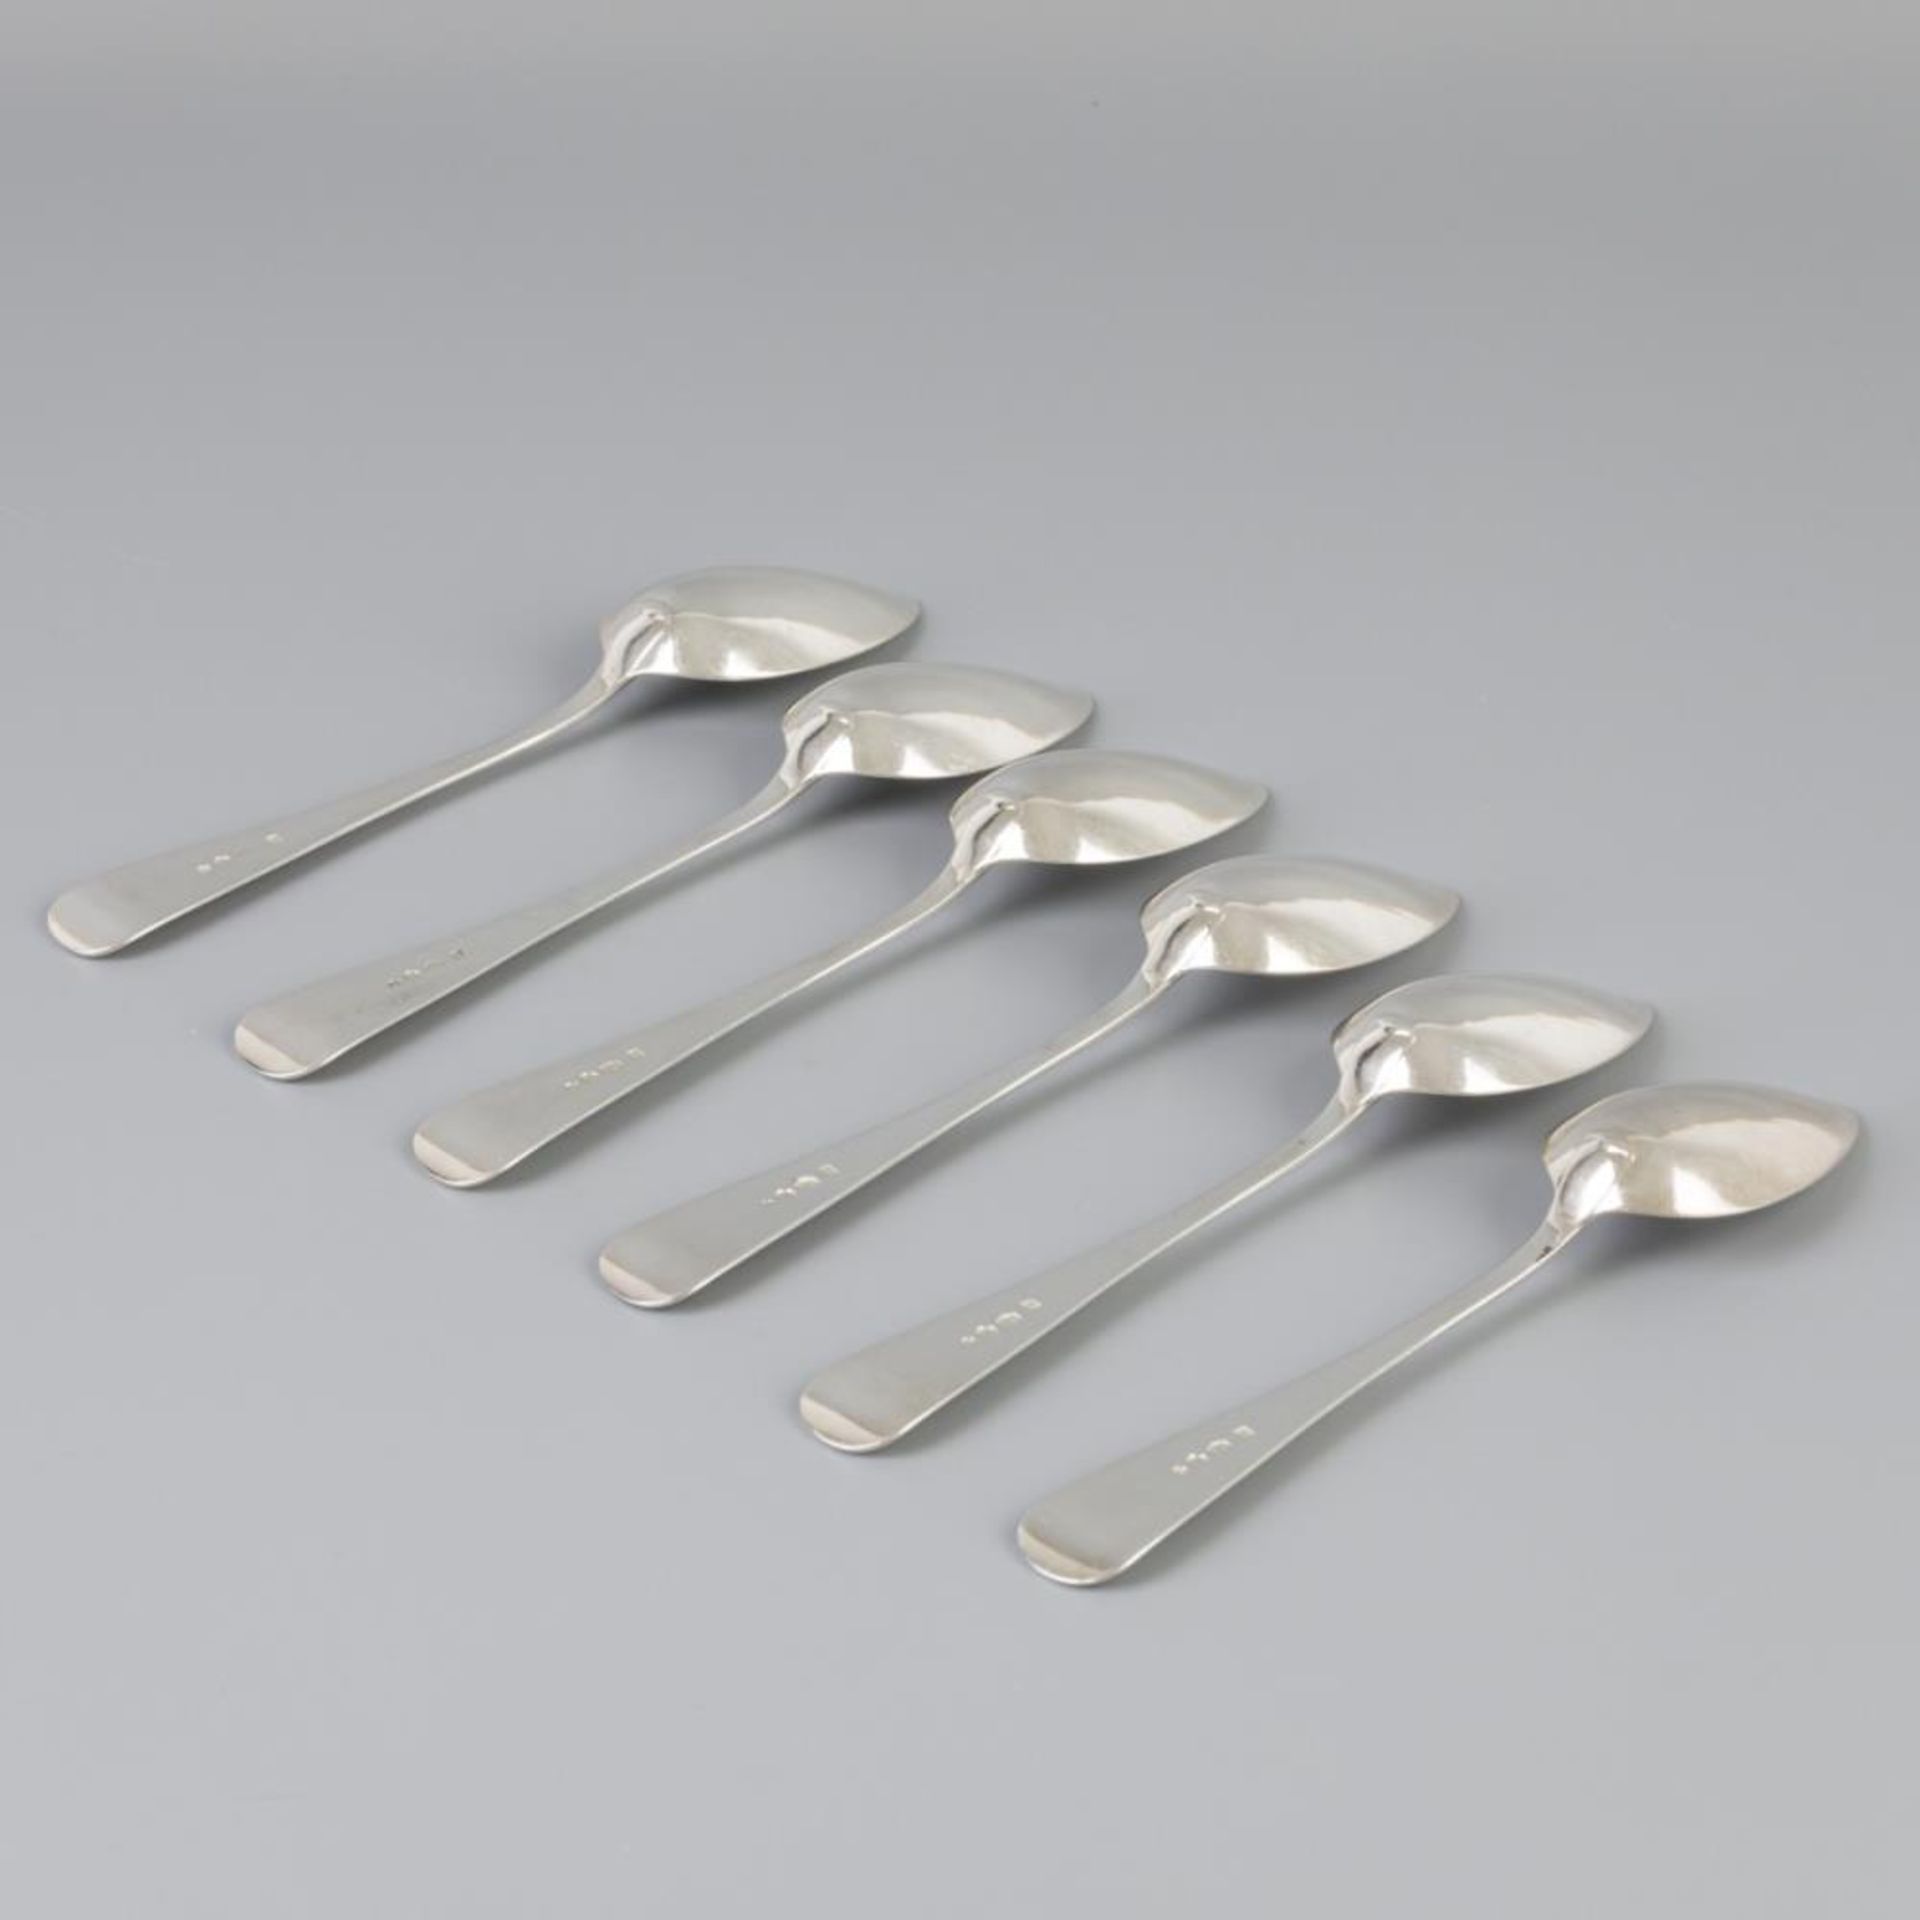 6 piece set of spoons "Haags Lofje" silver. - Image 4 of 6